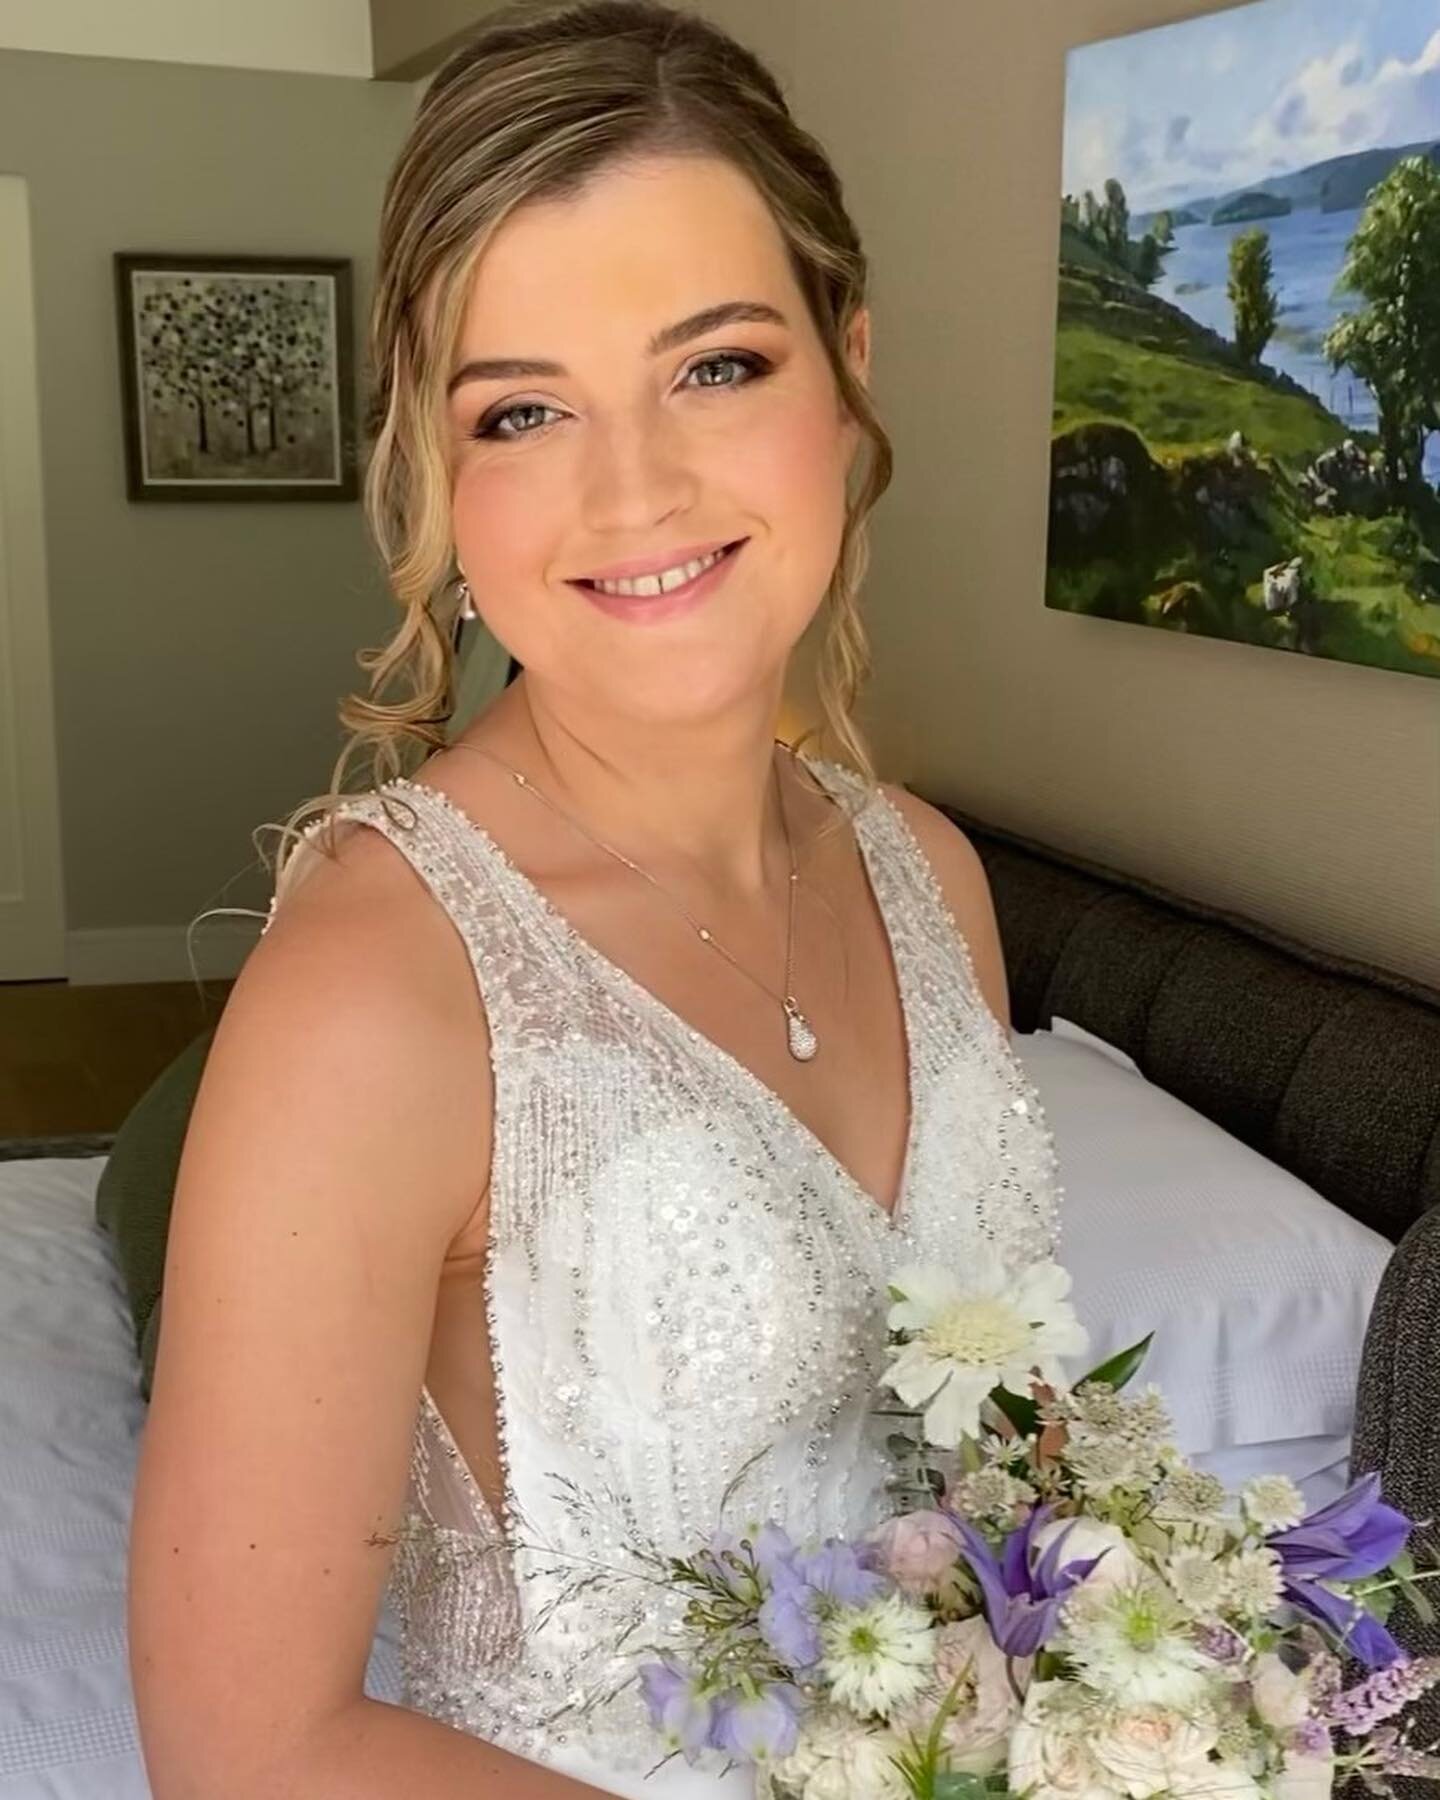 Bride Dearbhla ⭐️⭐️⭐️⭐️⭐️ &ldquo;Laura really helped me feel at ease with the whole process as I am not typically full makeup wearer but decided it would be worth it for the big day. I was absolutely delighted with the results both in person and in p